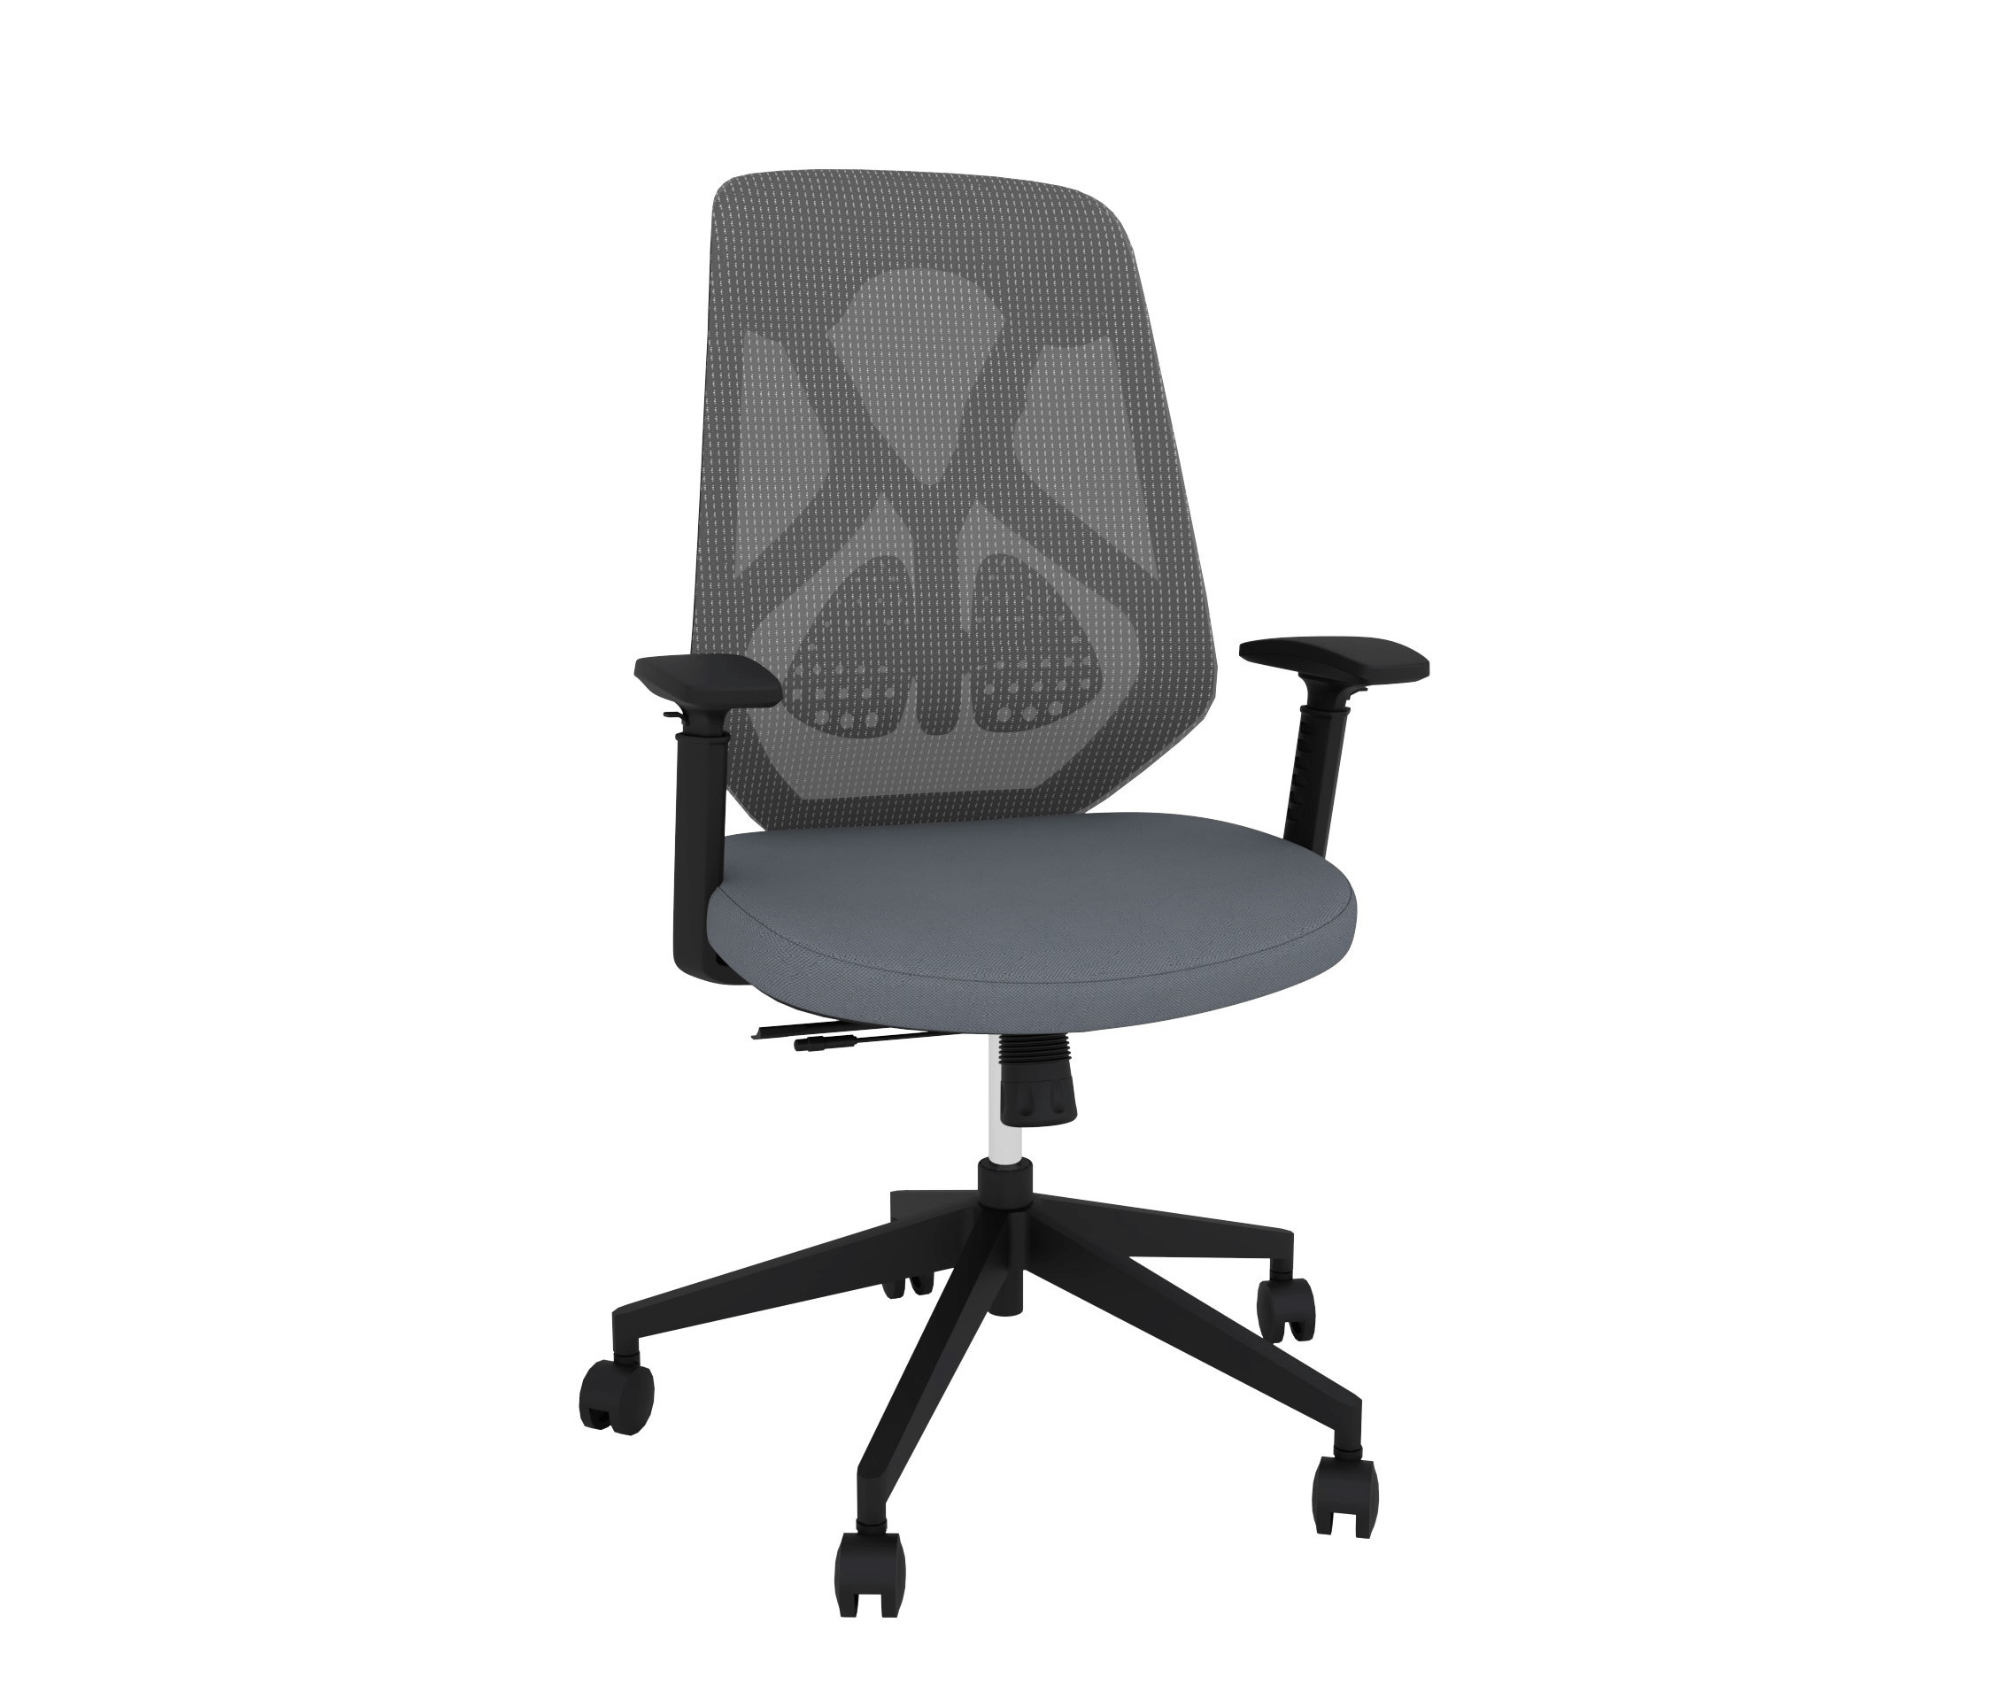 Ergonomic Chair | Office Chair with Adjustable Arms Porvata Office Chairs Slate